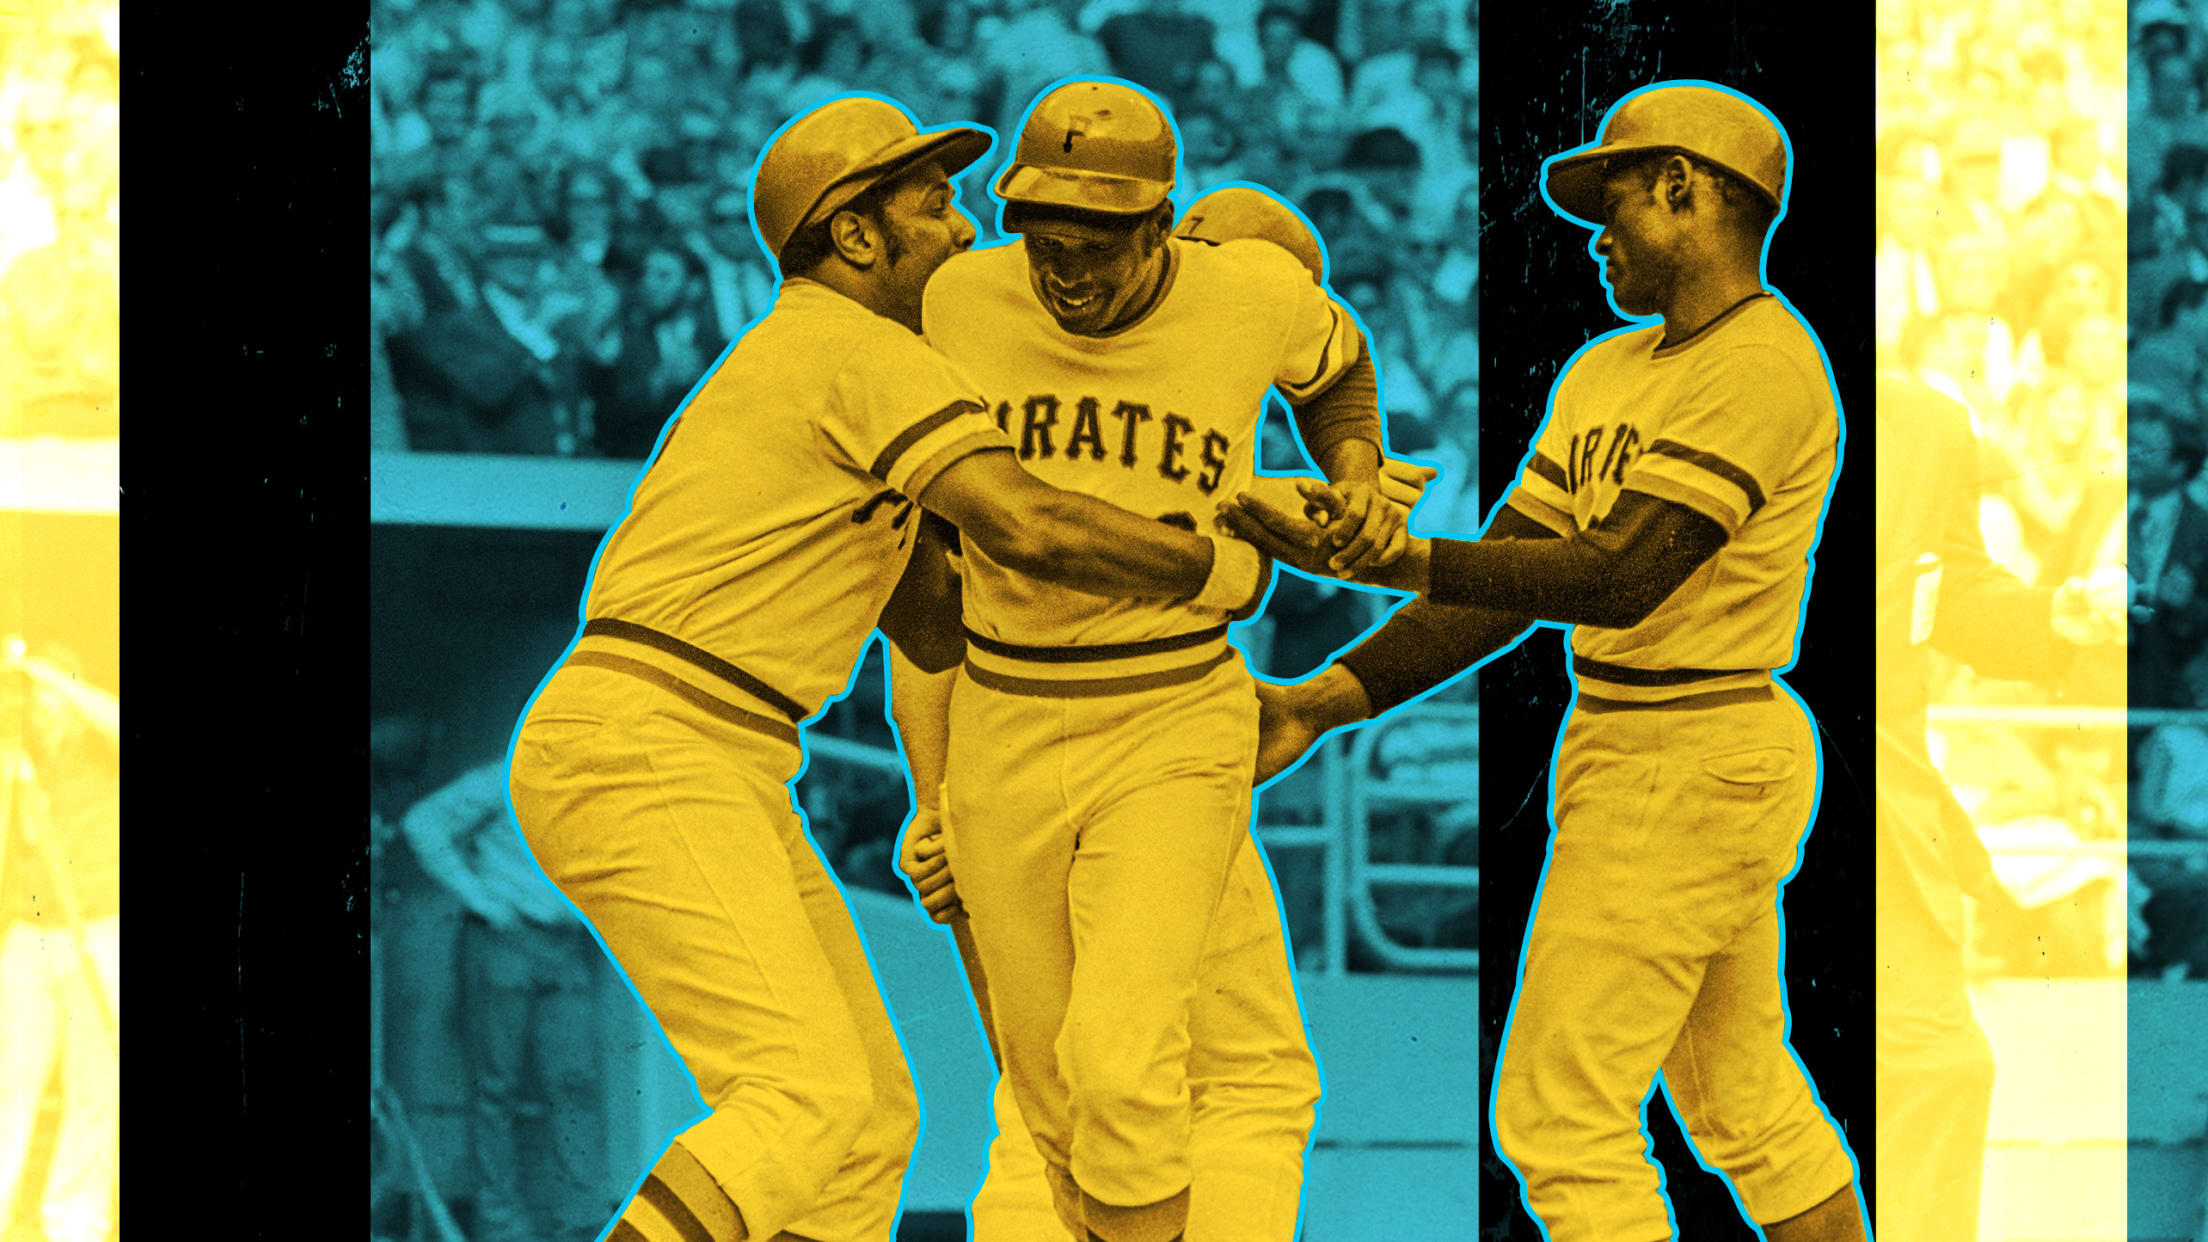 50 Years Later, the Pirates' Lineup of Color Still Resonates - The